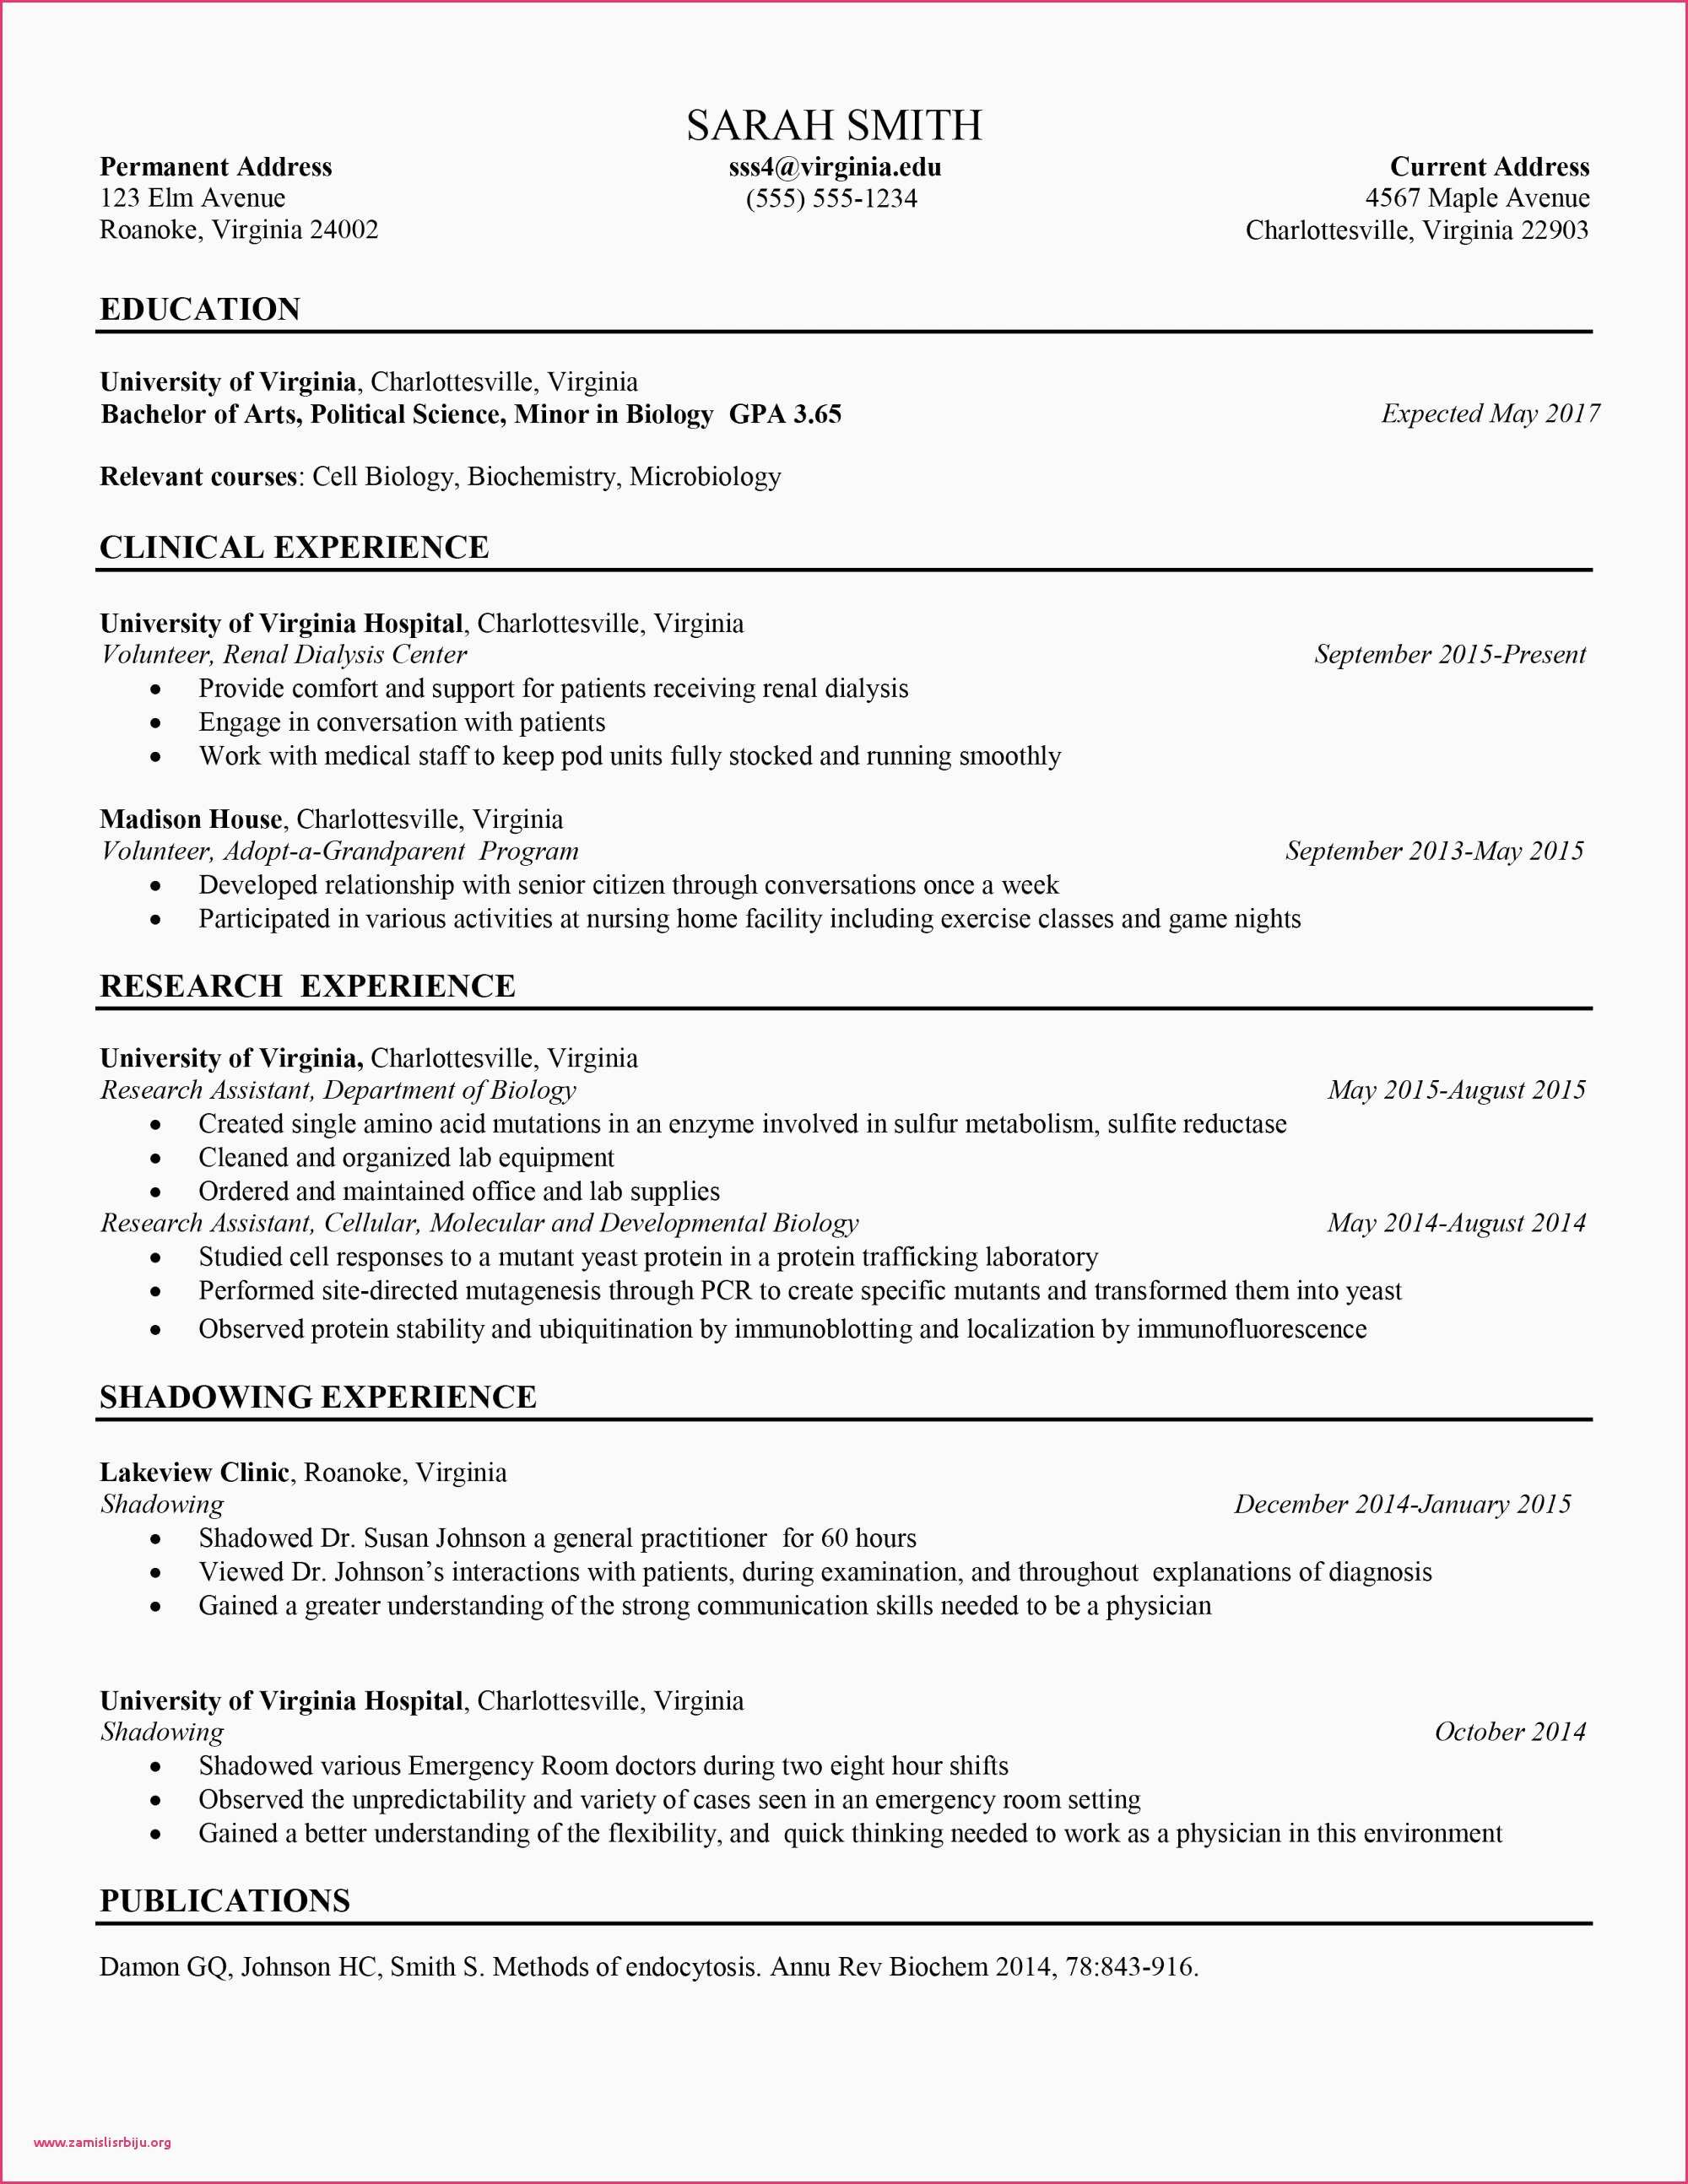 Nurse Cover Letter Personal Statement And Cover Letter Best Of Nursing Student Resume Cover Letter Examples Sample Nurse Cover Stock Of Personal Statement And Cover Letter nurse cover letter|wikiresume.com